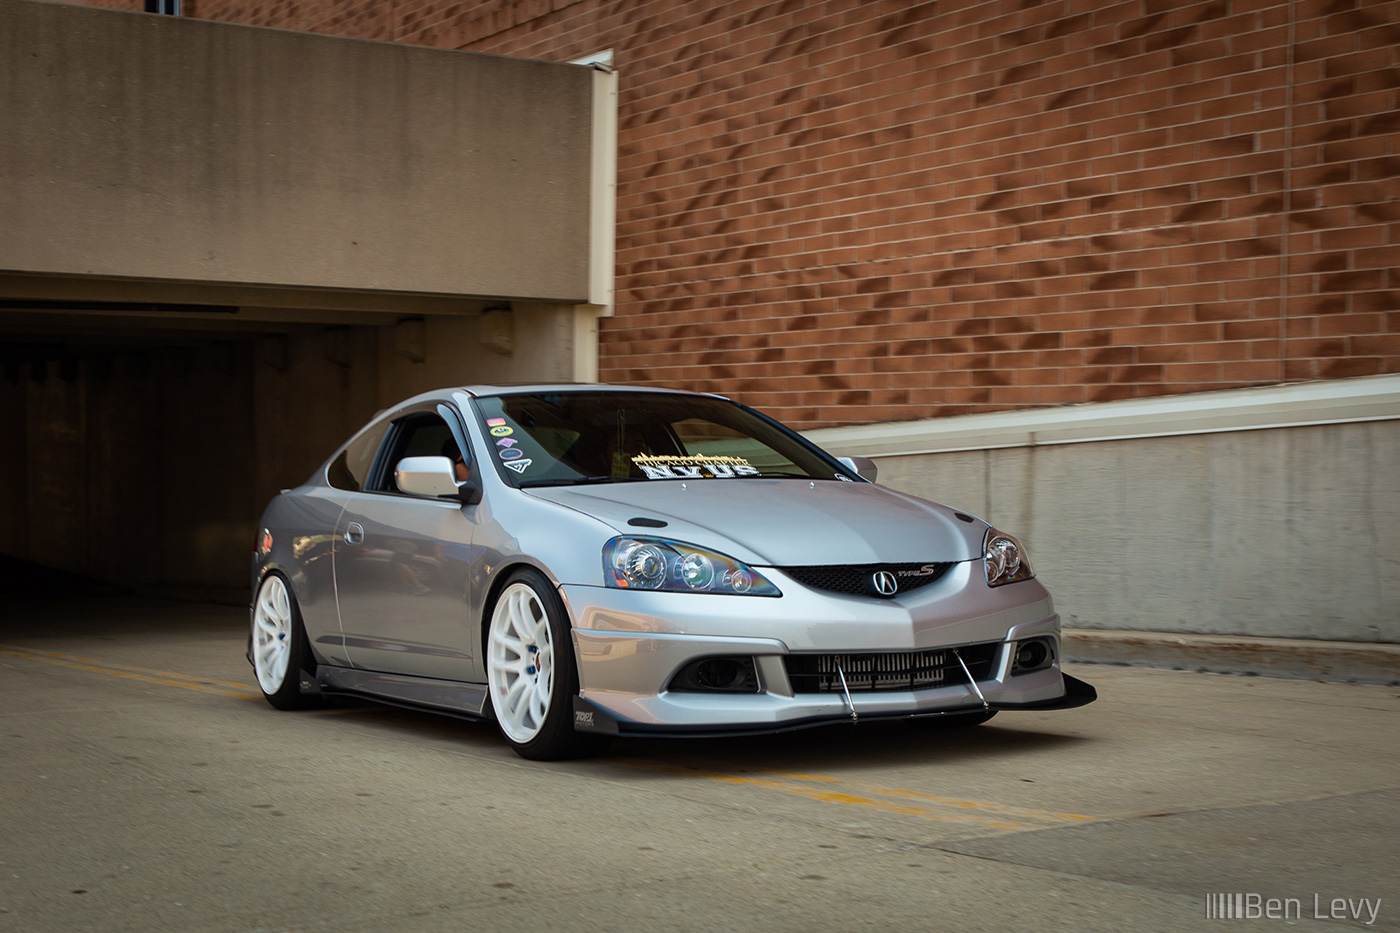 Silver Acura RSX Driving Up a Ramp